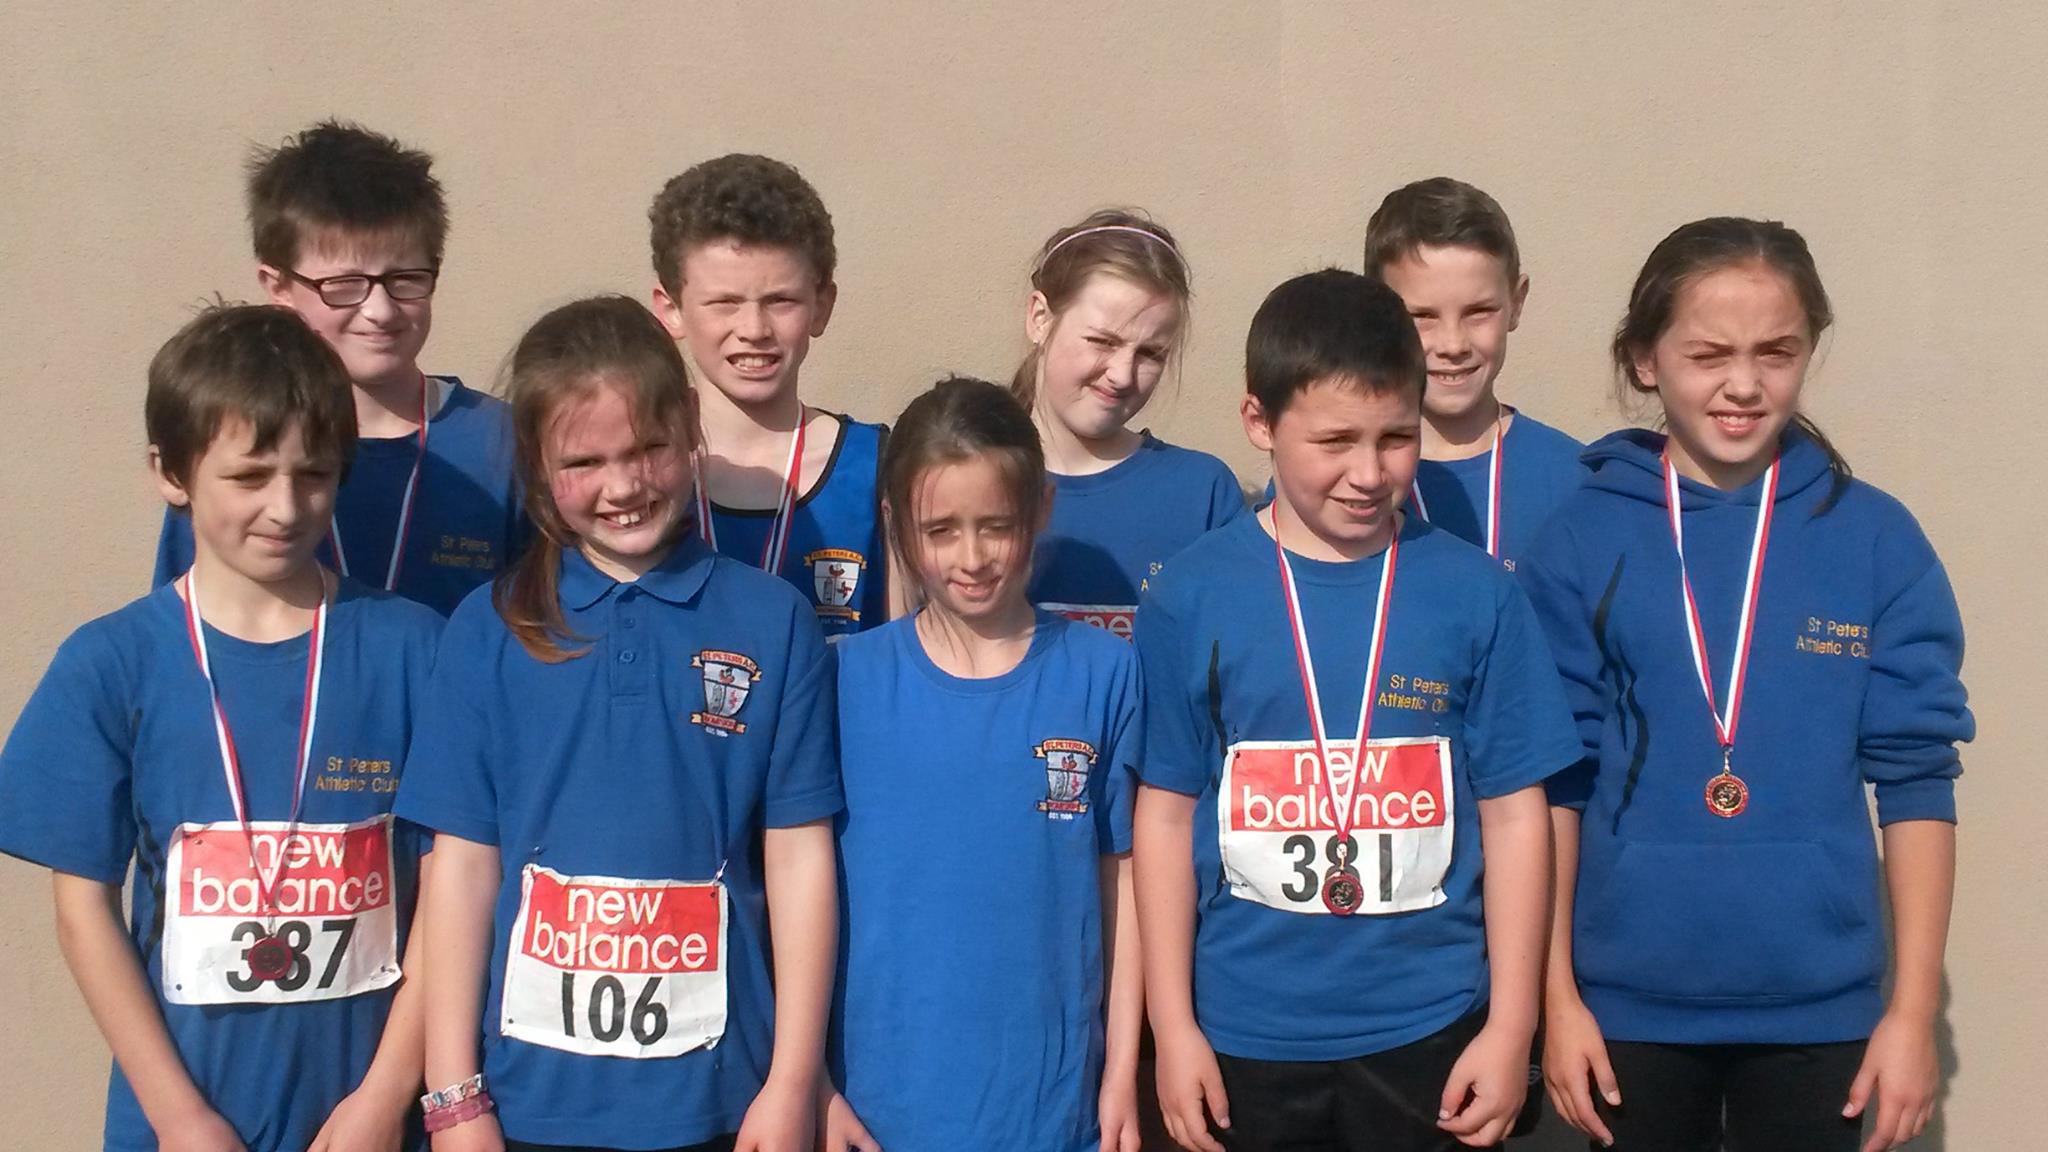 St Peter's AC athletes at Louth Cross Country Championships (Bush, October 2015)